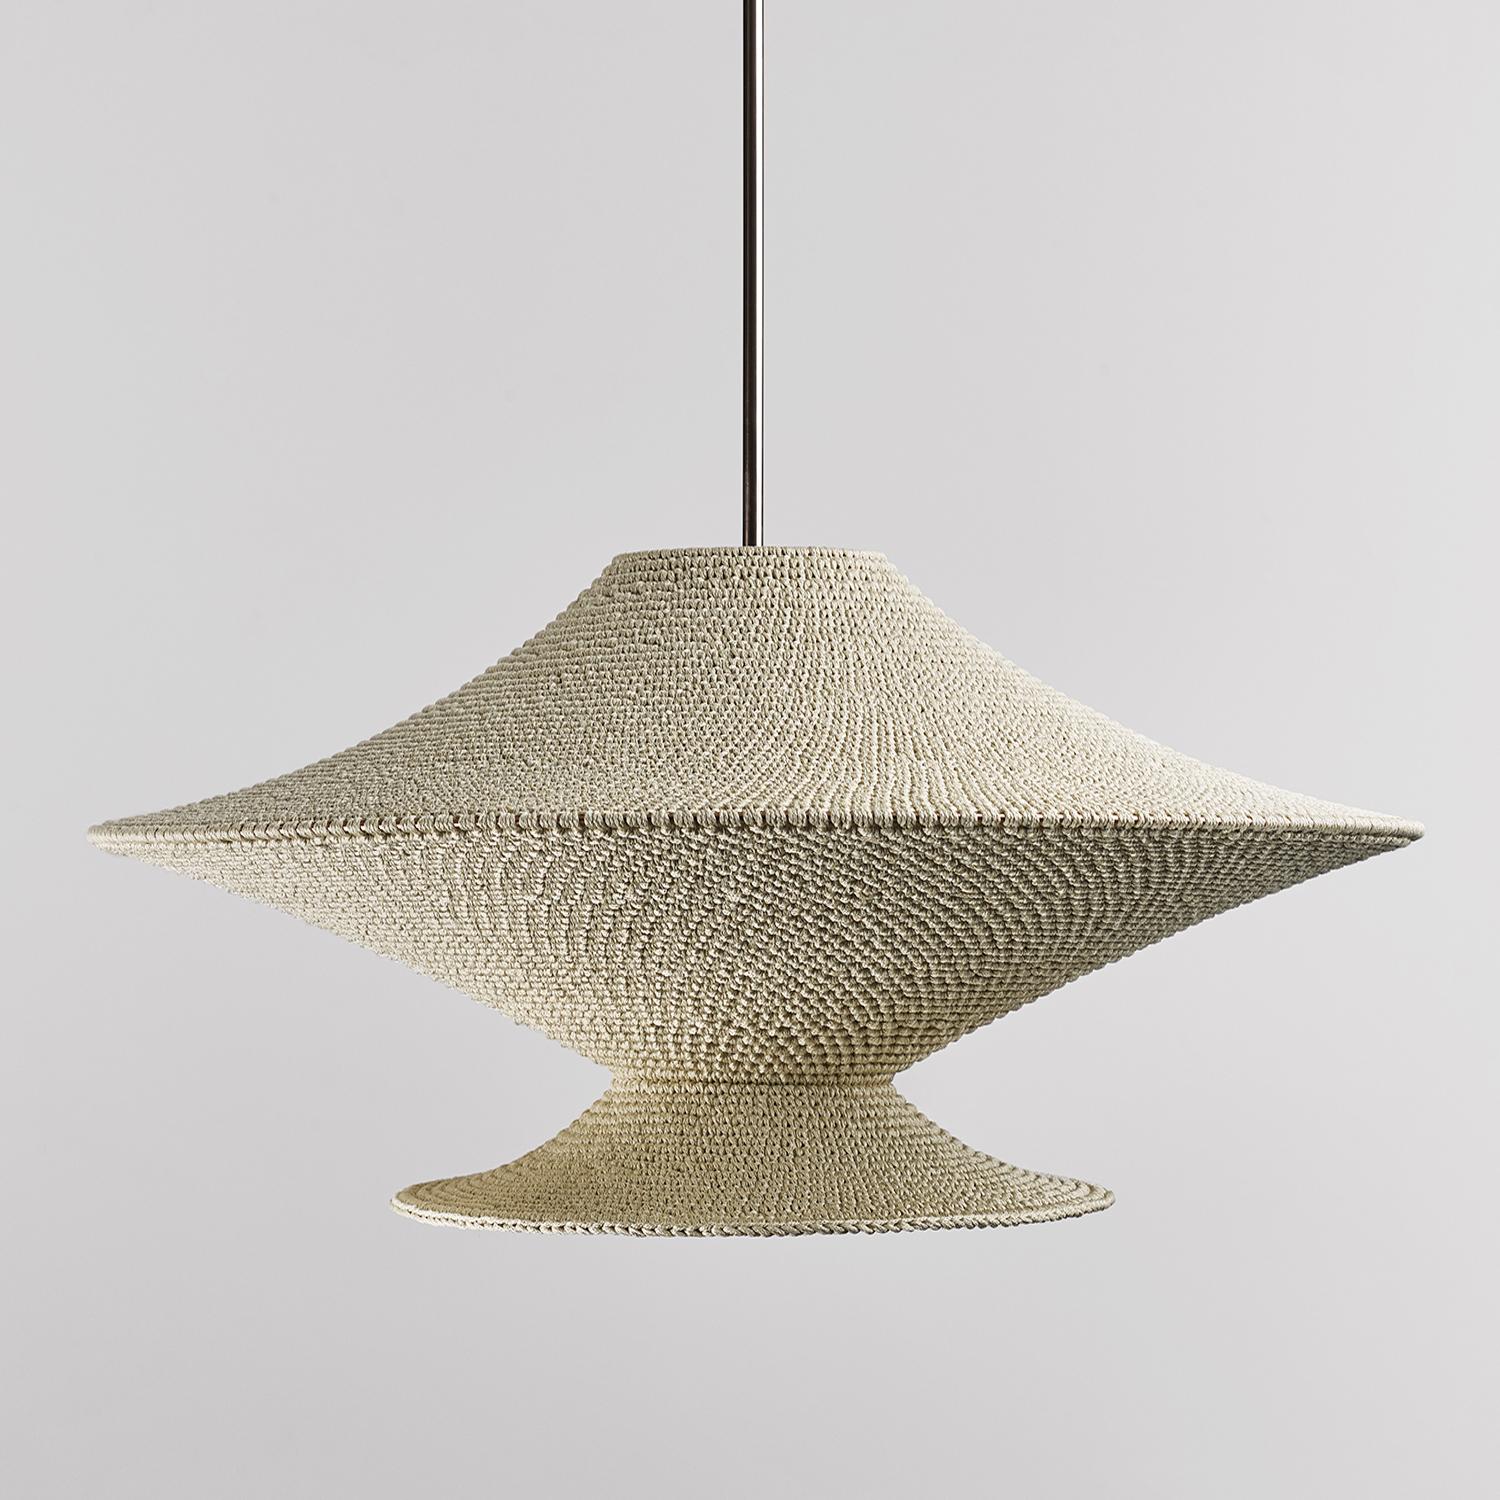 A diffused atmospheric light. Jupe Solitaire is a statement pendant suited to bedrooms and social spaces.

Each Naomi Paul pendant and lighting design is crafted entirely by hand in our London studio to order, by our highly skilled team of makers.